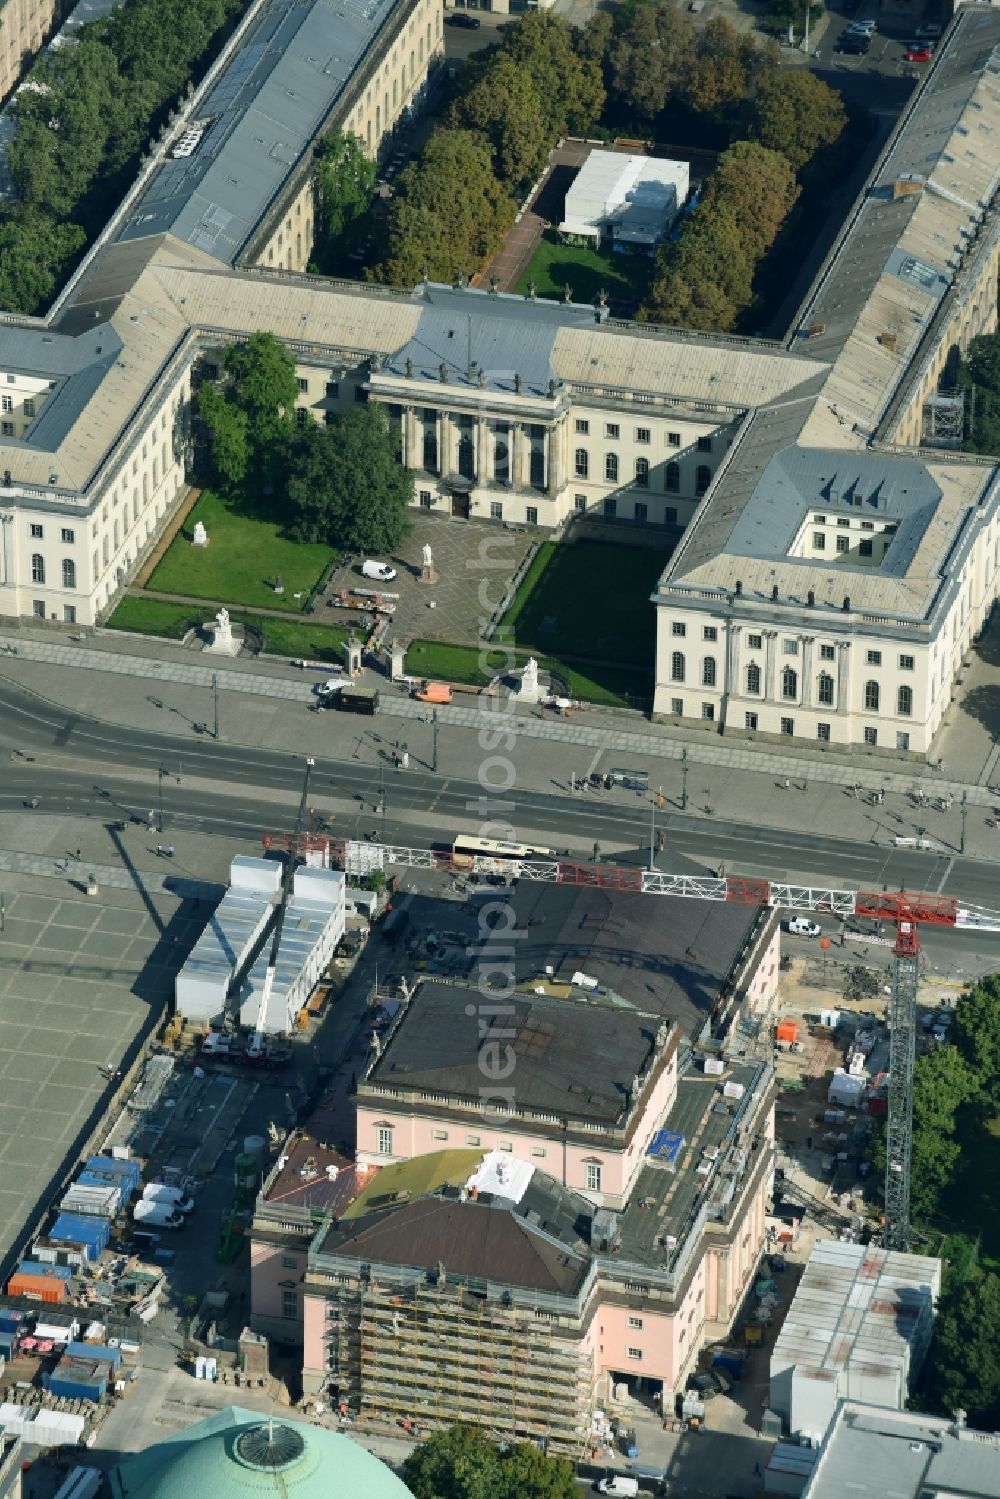 Berlin from above - Reconstruction and renovation of the building of the Staatsoper Unter den Linden in Berlin at Bebelplatz. It is the oldest opera house and theater building in Berlin. A new building will serve as stacks and warehouse for the Staatsoper Komplex. The architect HG Merz is a overseeing the reconstruction of the historical building complex